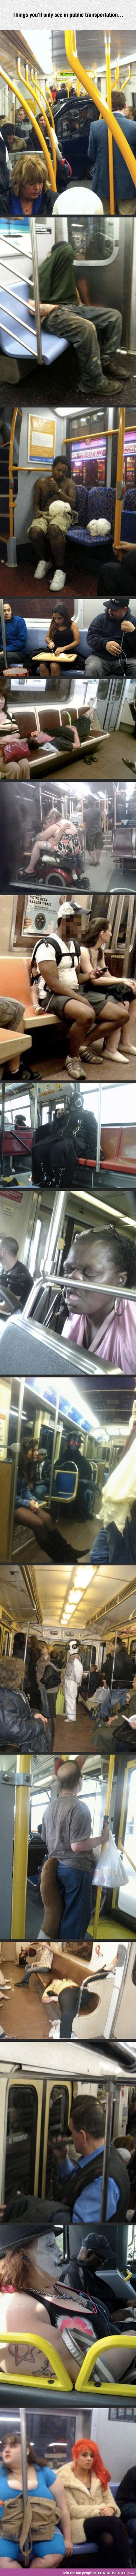 16 Things you only see on public transport